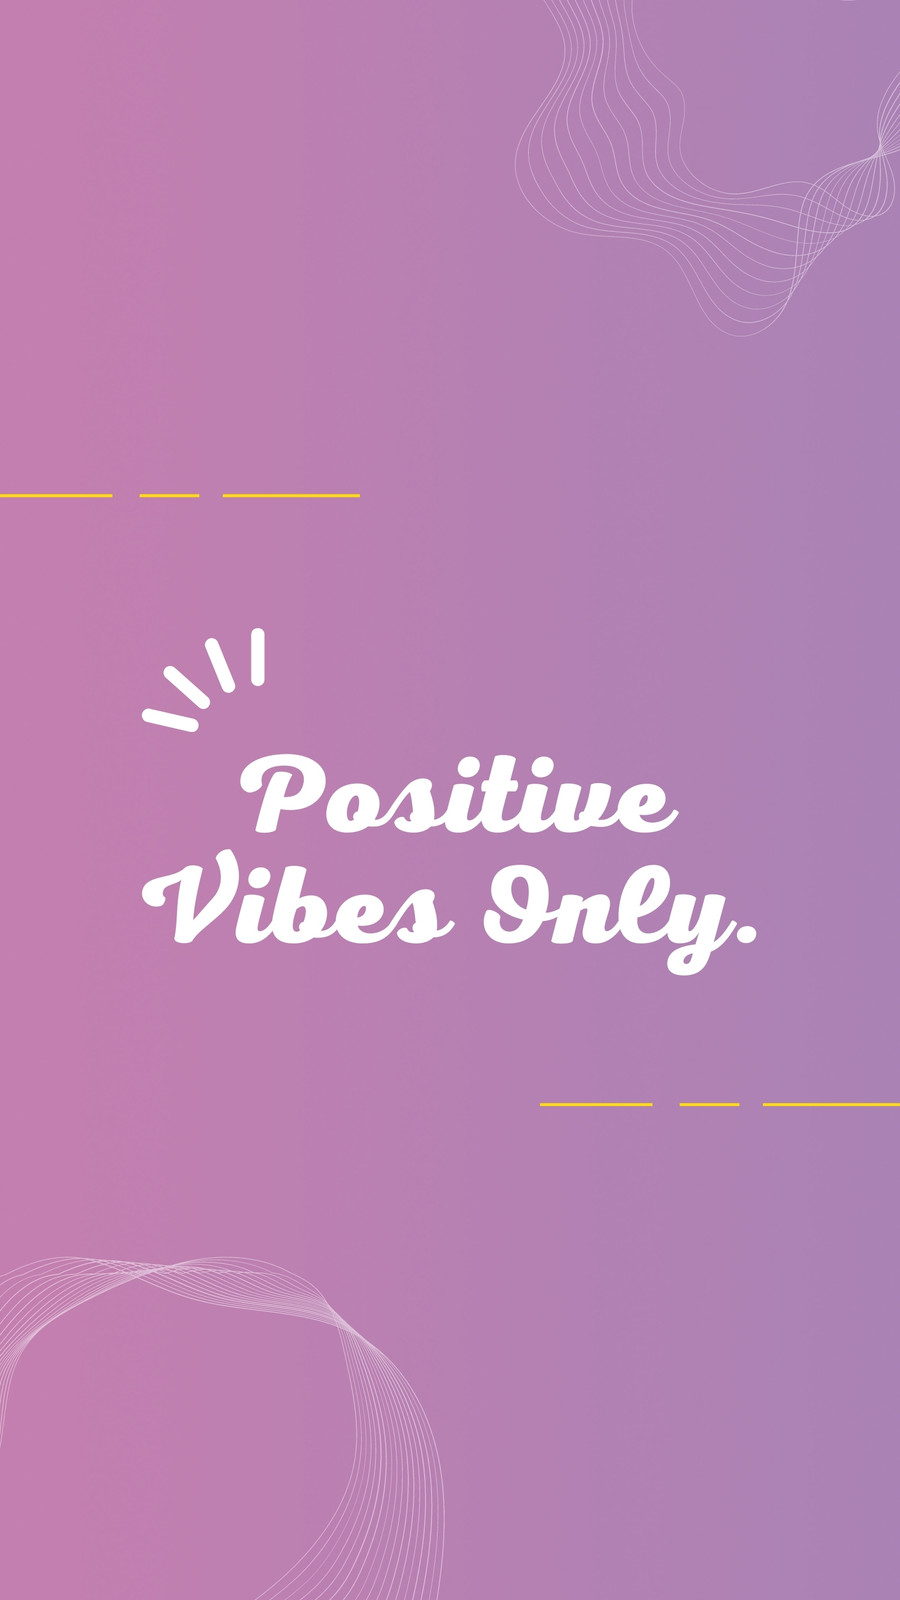 Good vibes only 1080P, 2K, 4K, 5K HD wallpapers free download | Wallpaper  Flare